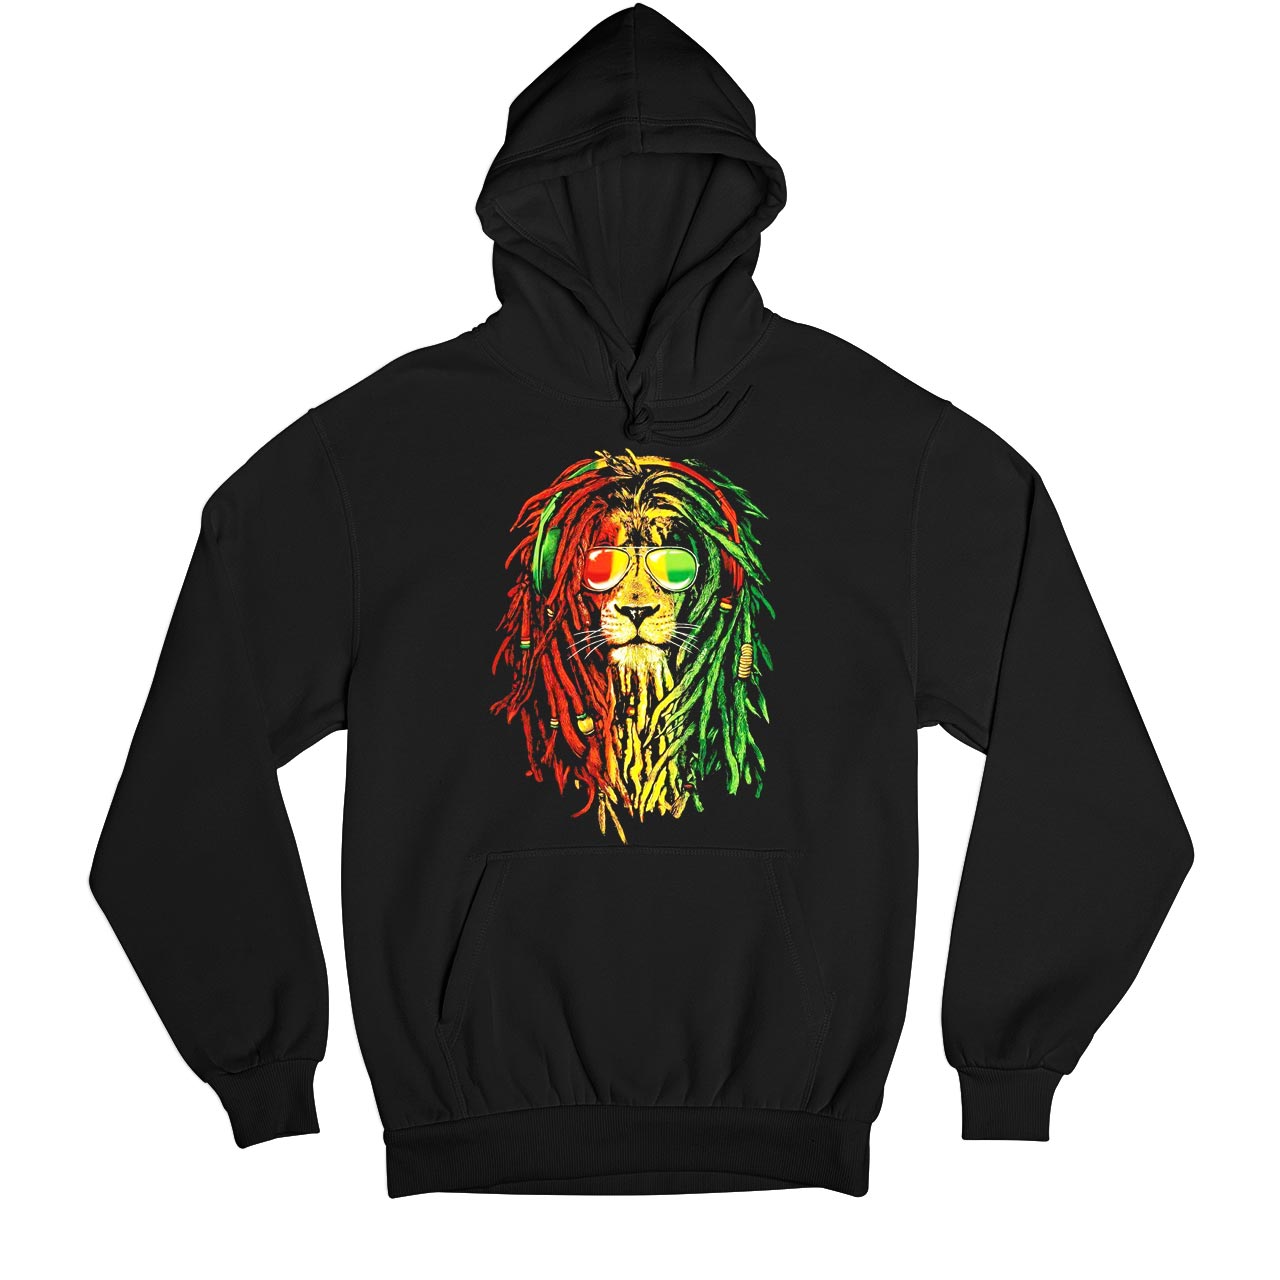 Bob Marley Hoodie - On Sale - L (Chest size 44 IN)